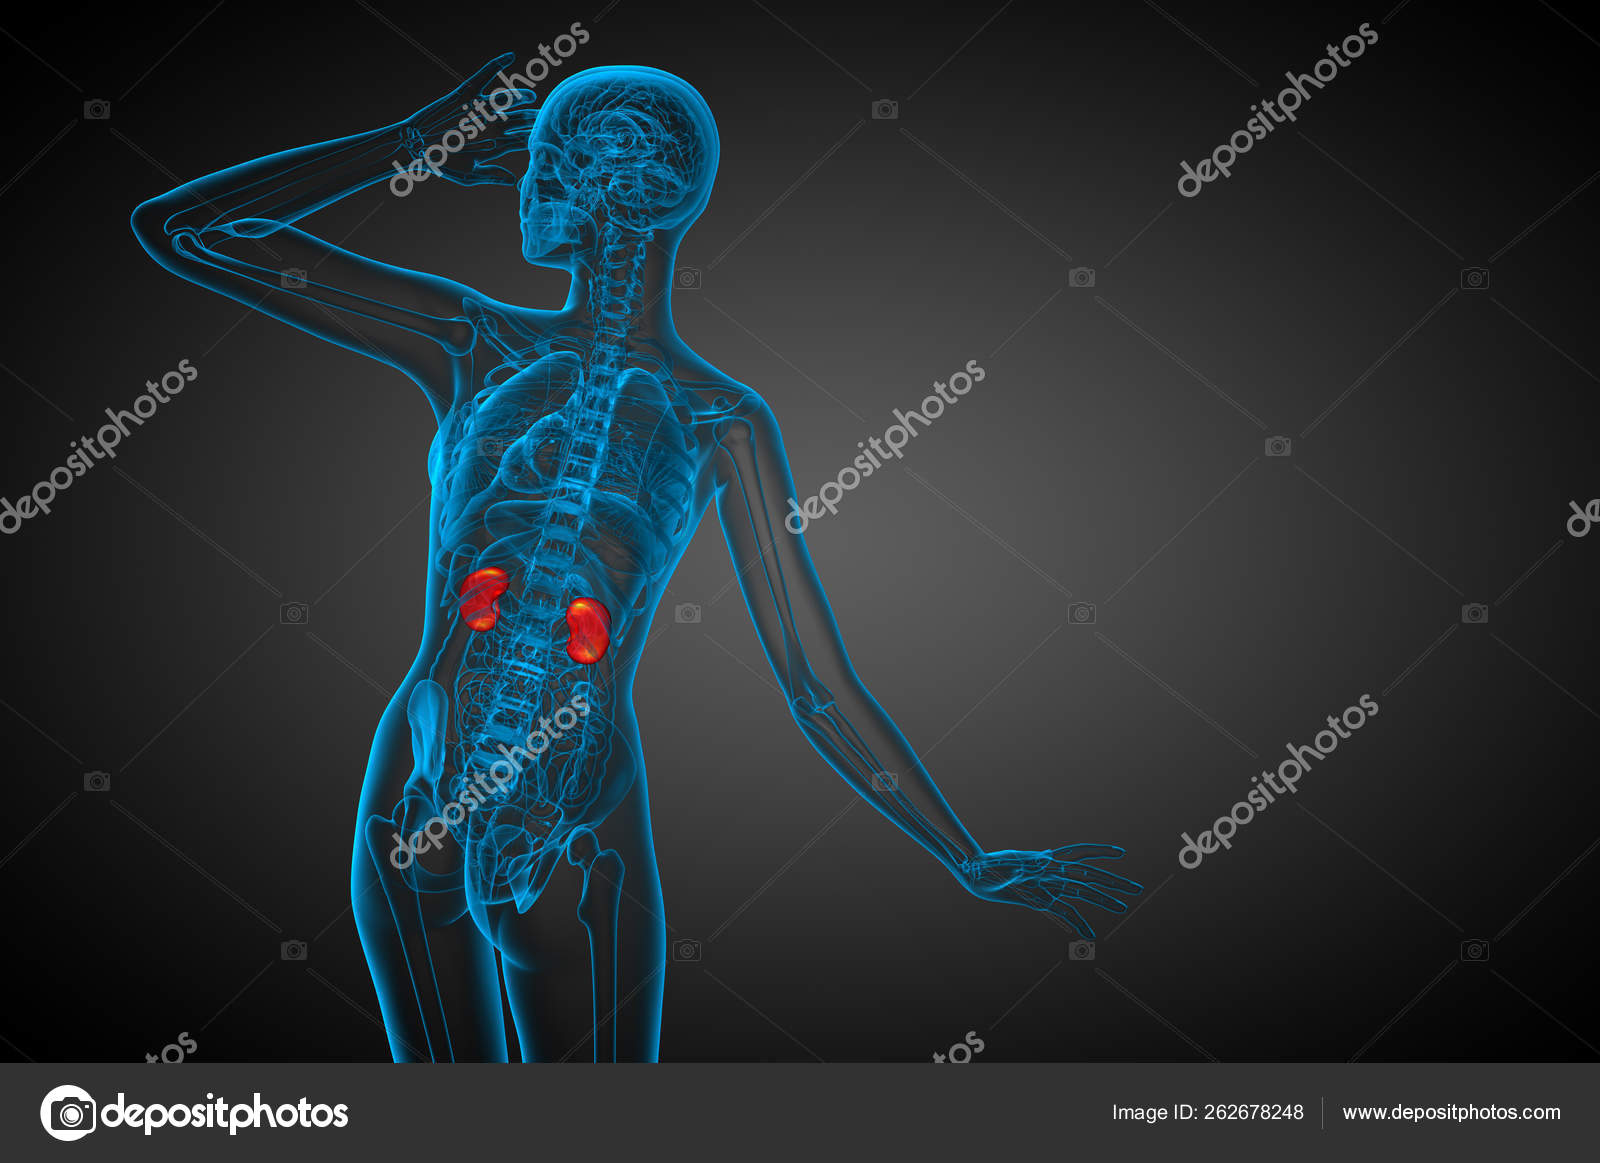 Render Medical Illustration Human Kidney Back View Stock Photo by ...